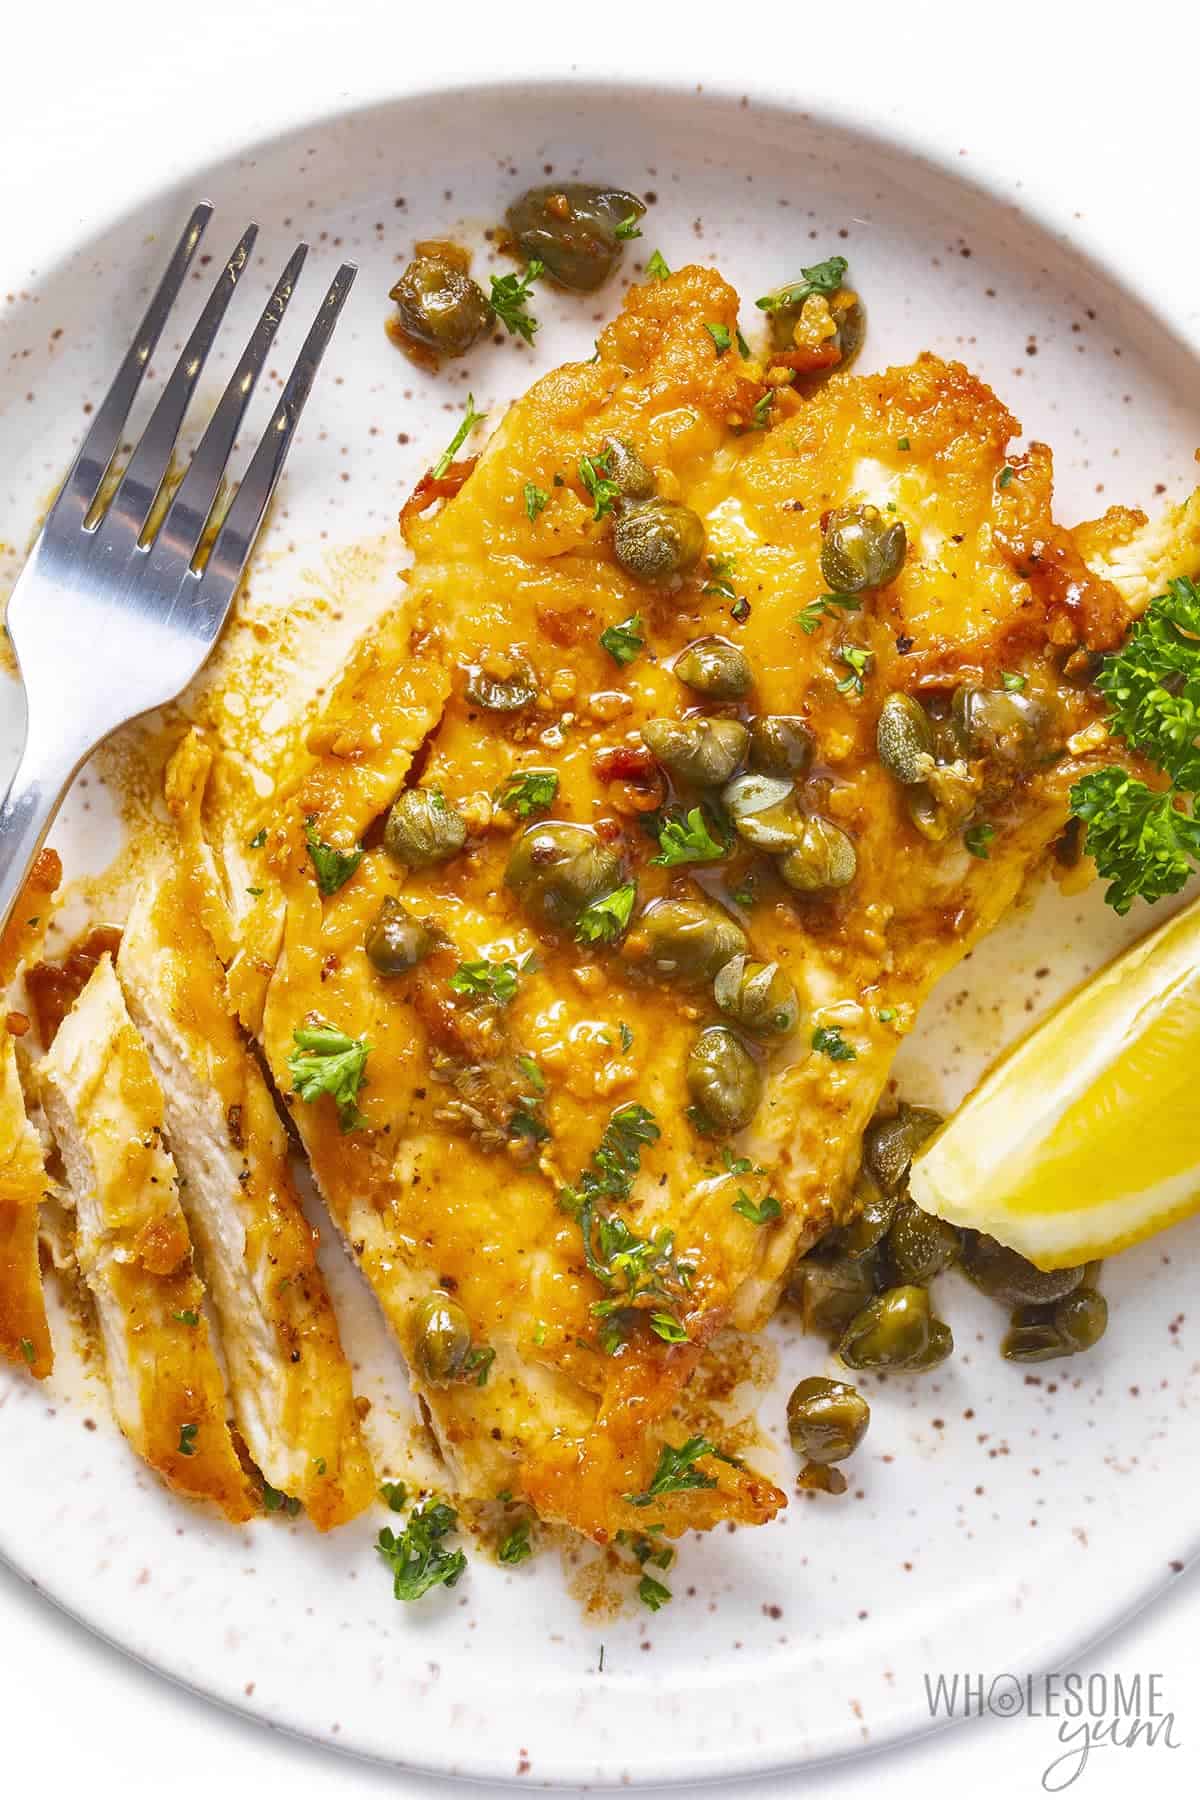 The lemon chicken piccata is plated and sliced ​​next to a fork.